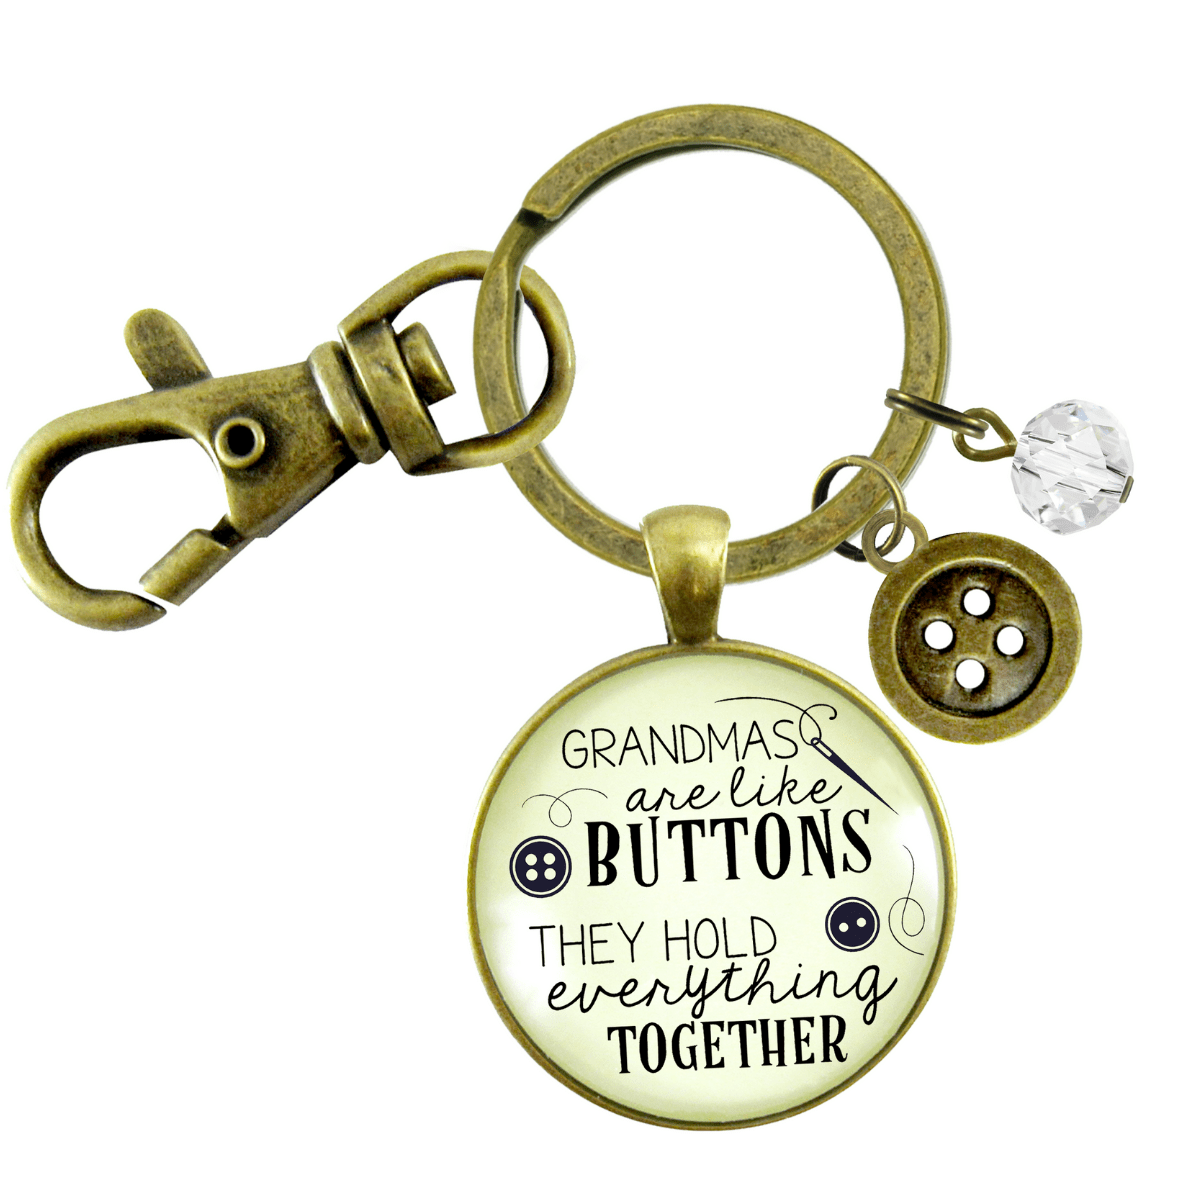 Family Keychain Grandmas Are Like Buttons They Hold Everything Together Seamstress Jewelry - Gutsy Goodness Handmade Jewelry;Family Keychain Grandmas Are Like Buttons They Hold Everything Together Seamstress Jewelry - Gutsy Goodness Handmade Jewelry Gifts